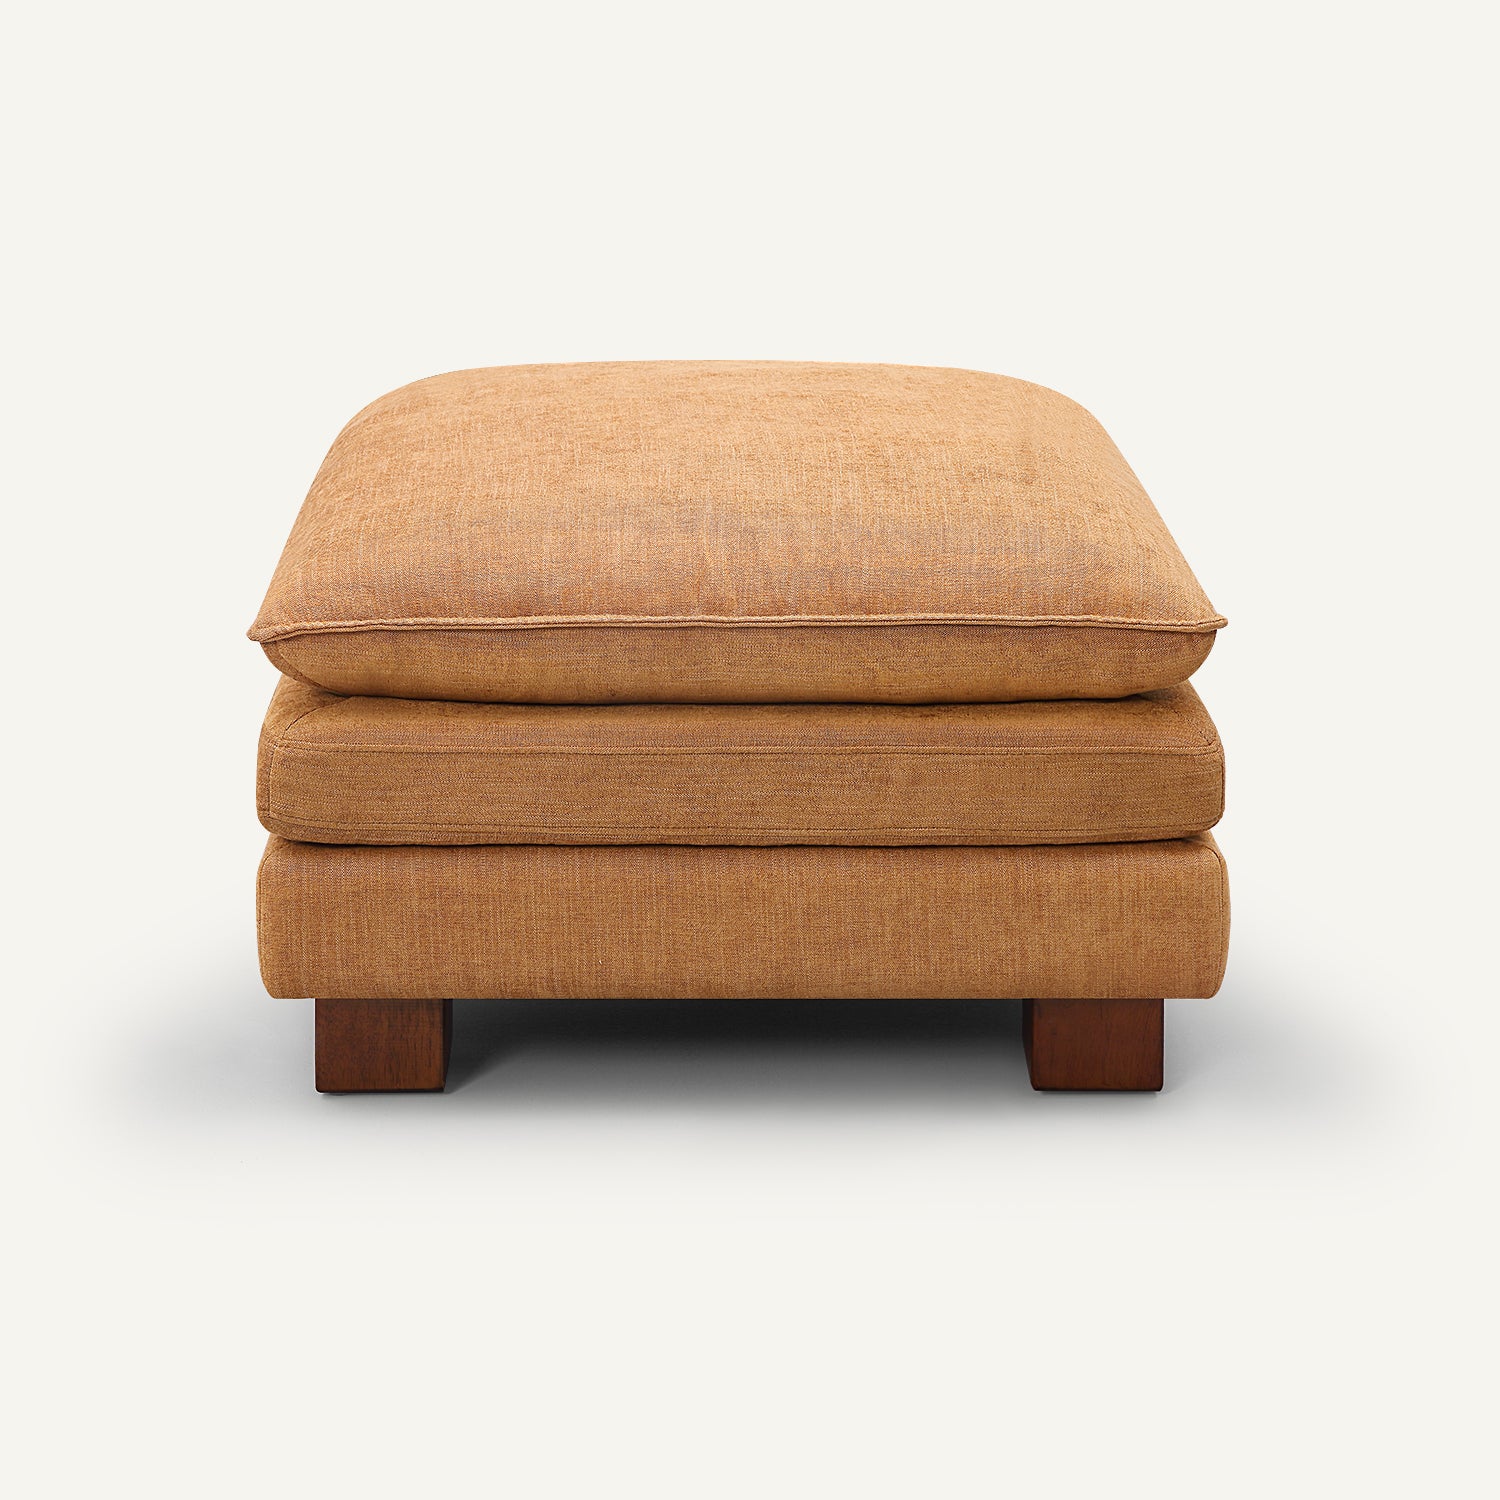 Stacked Tan Linen Square Ottoman